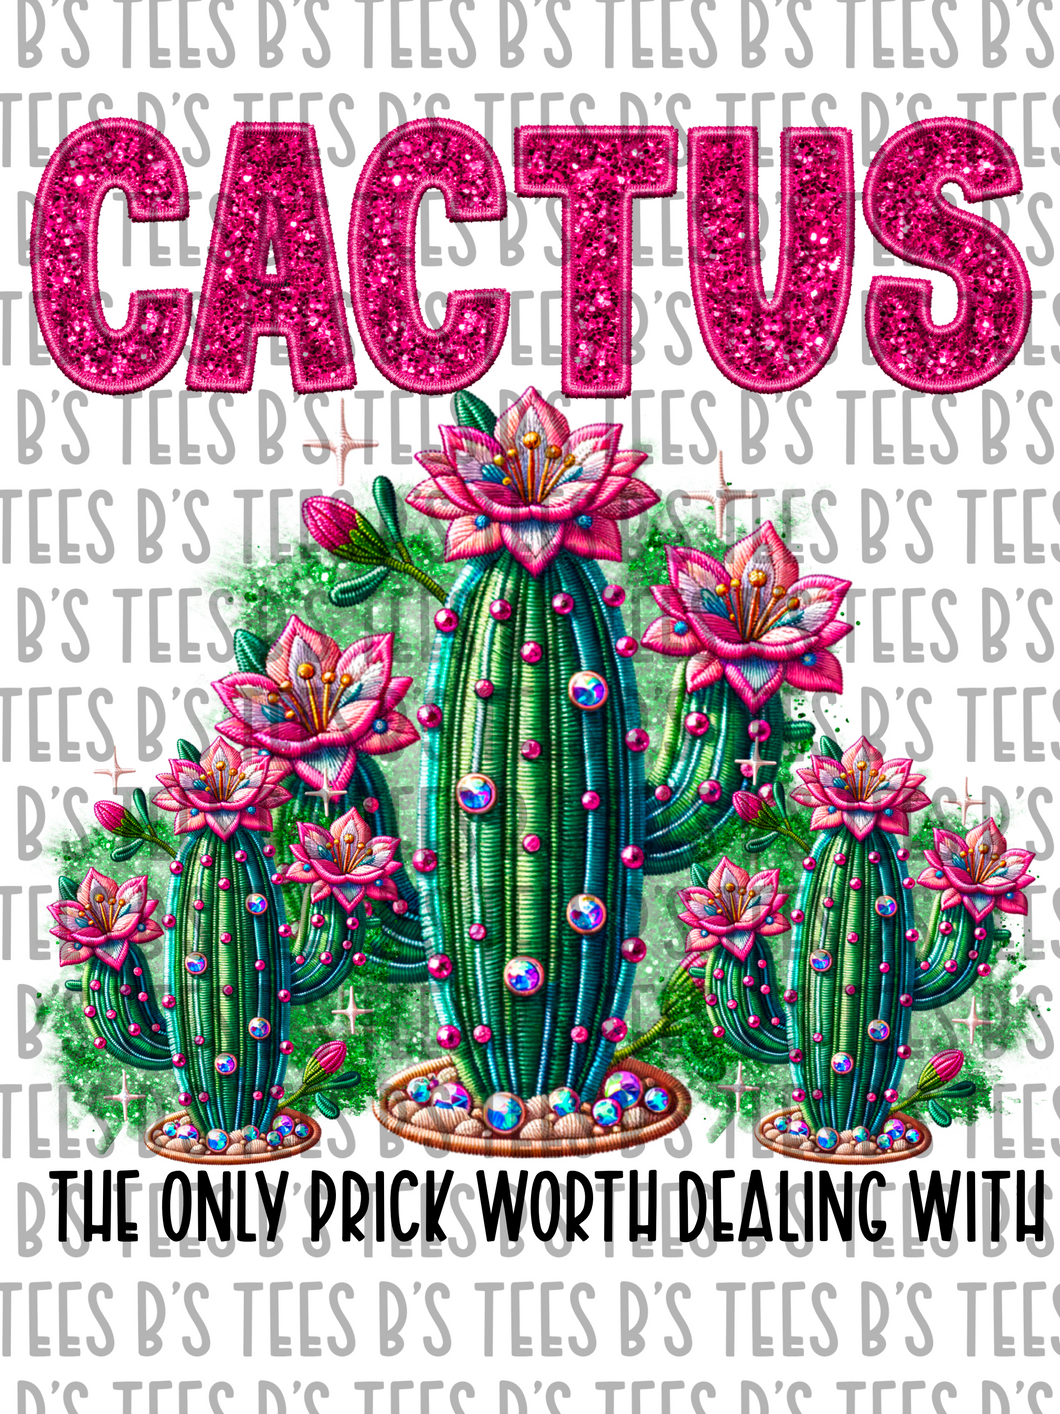 Cactus The Only Prick Worth Dealing With